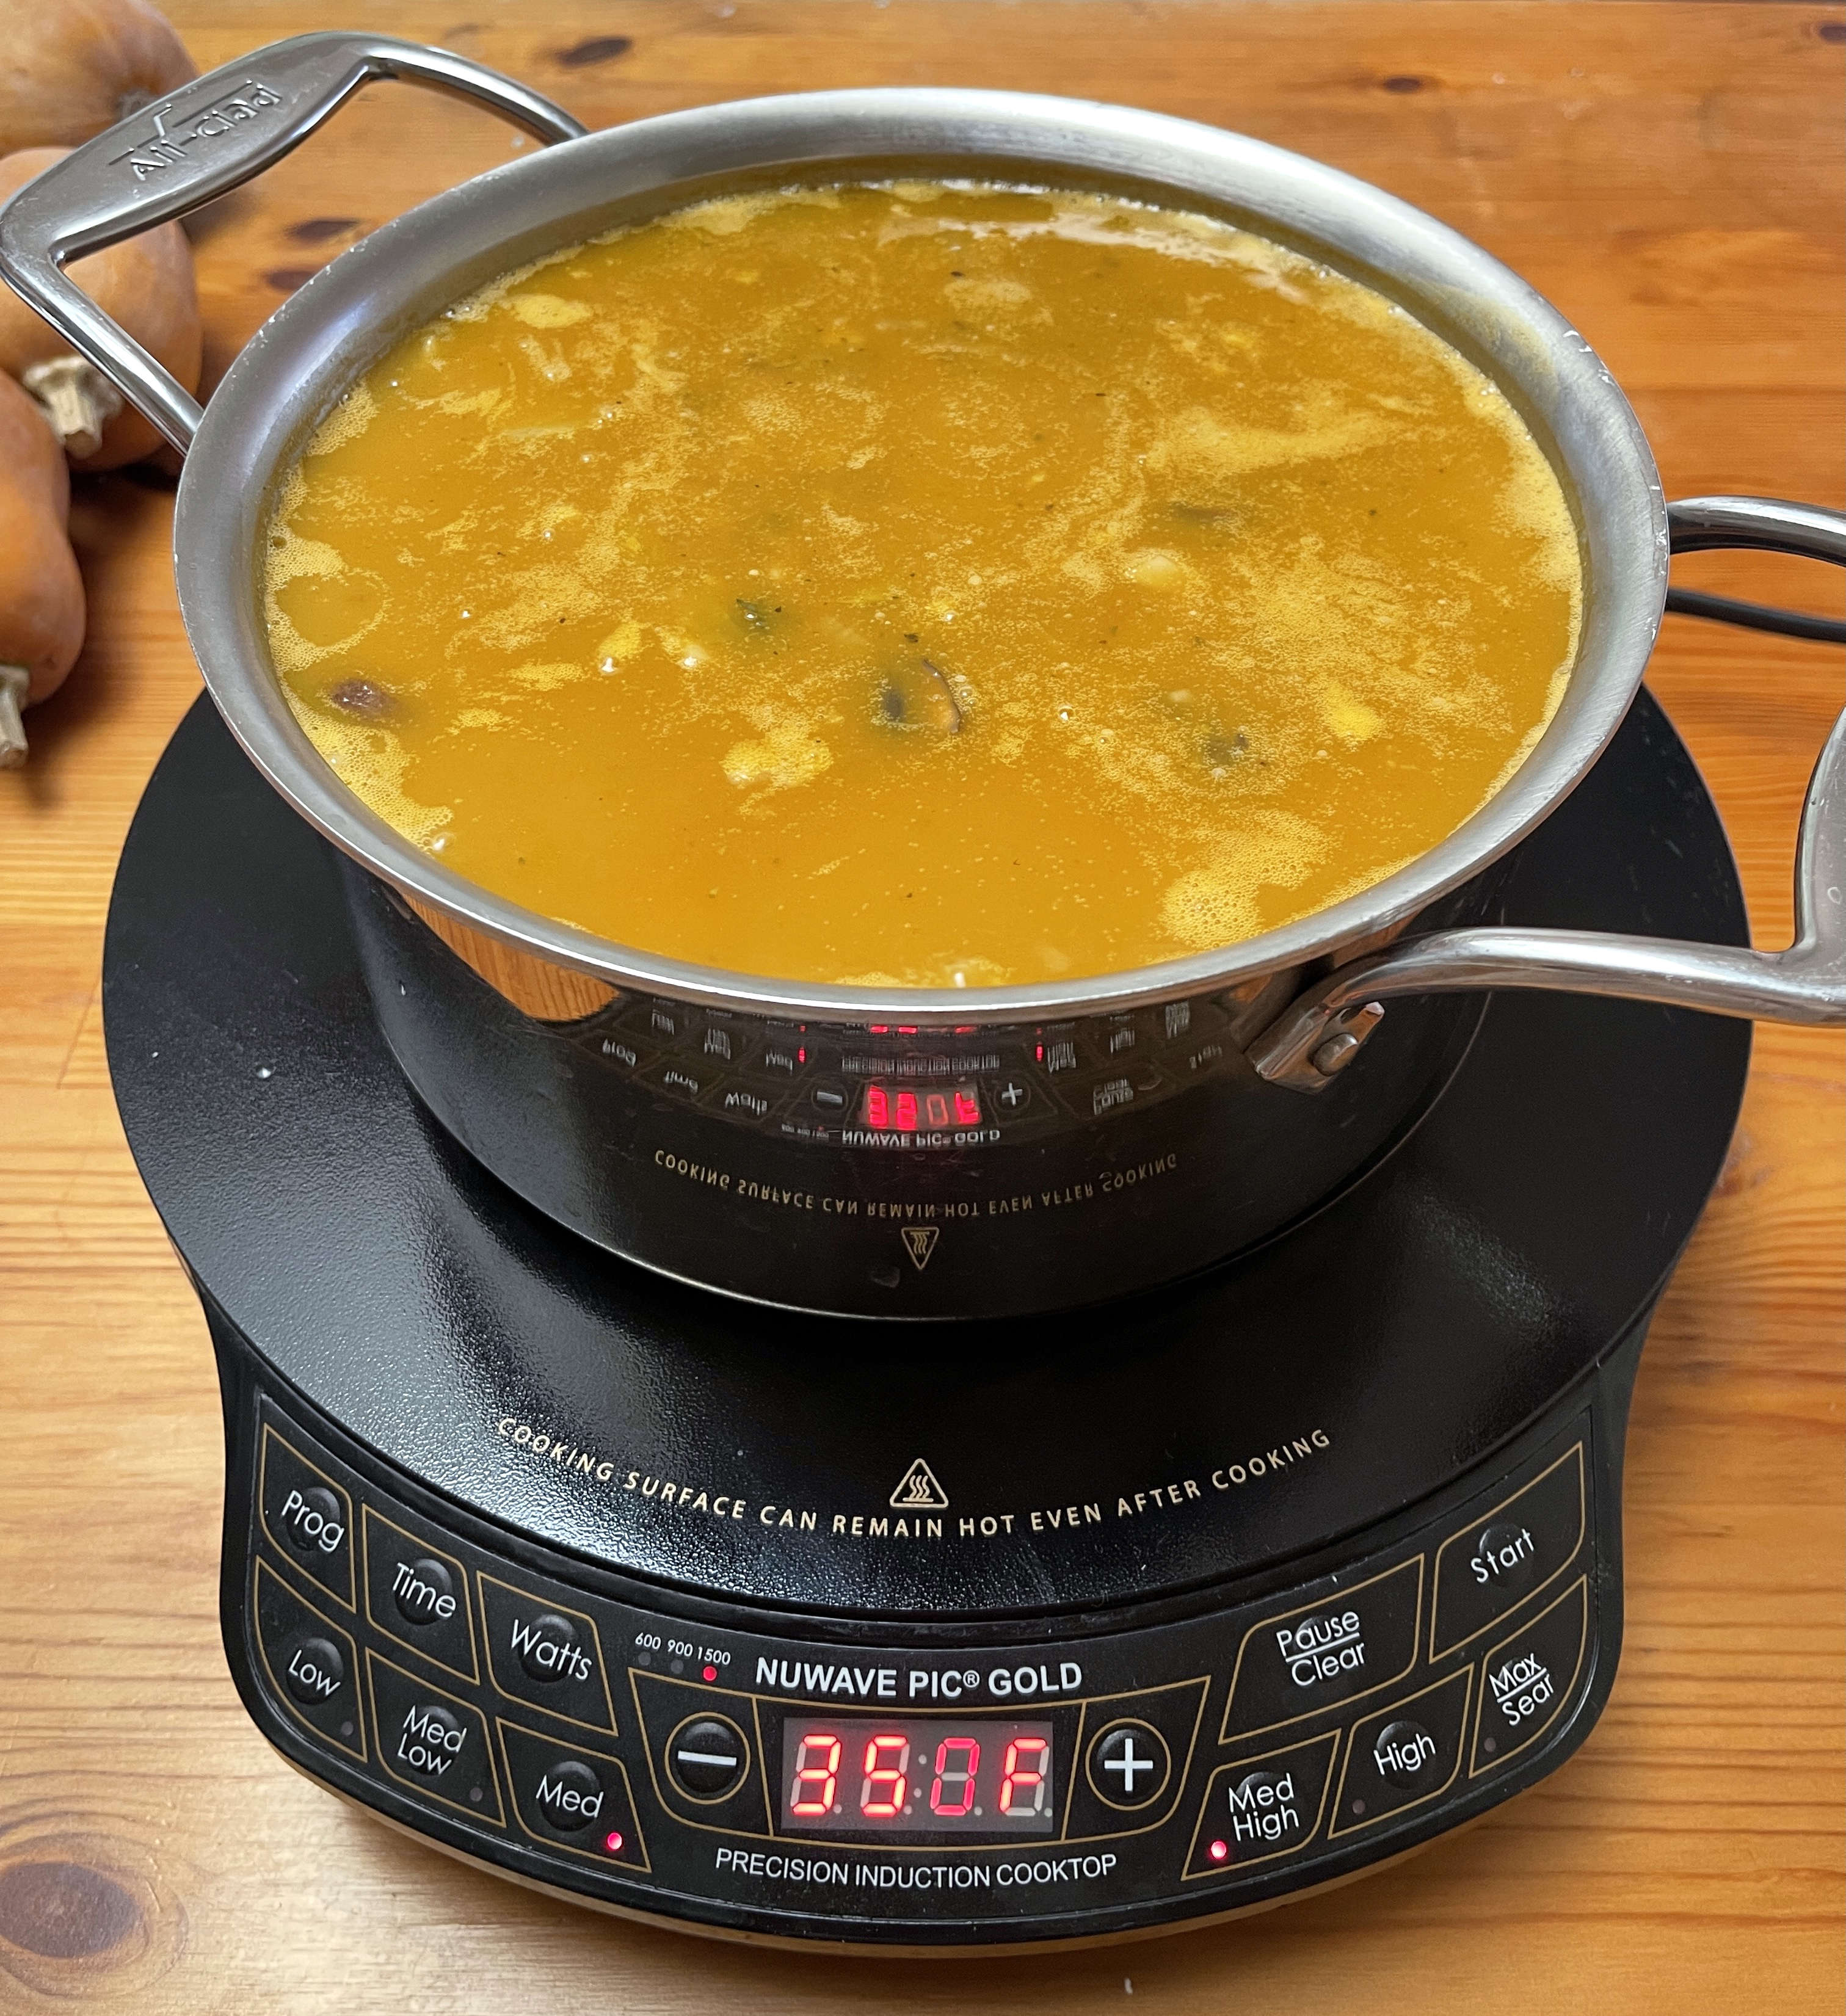 A pot of soup cooking on a portable induction cooktop that is sitting on a wooden table